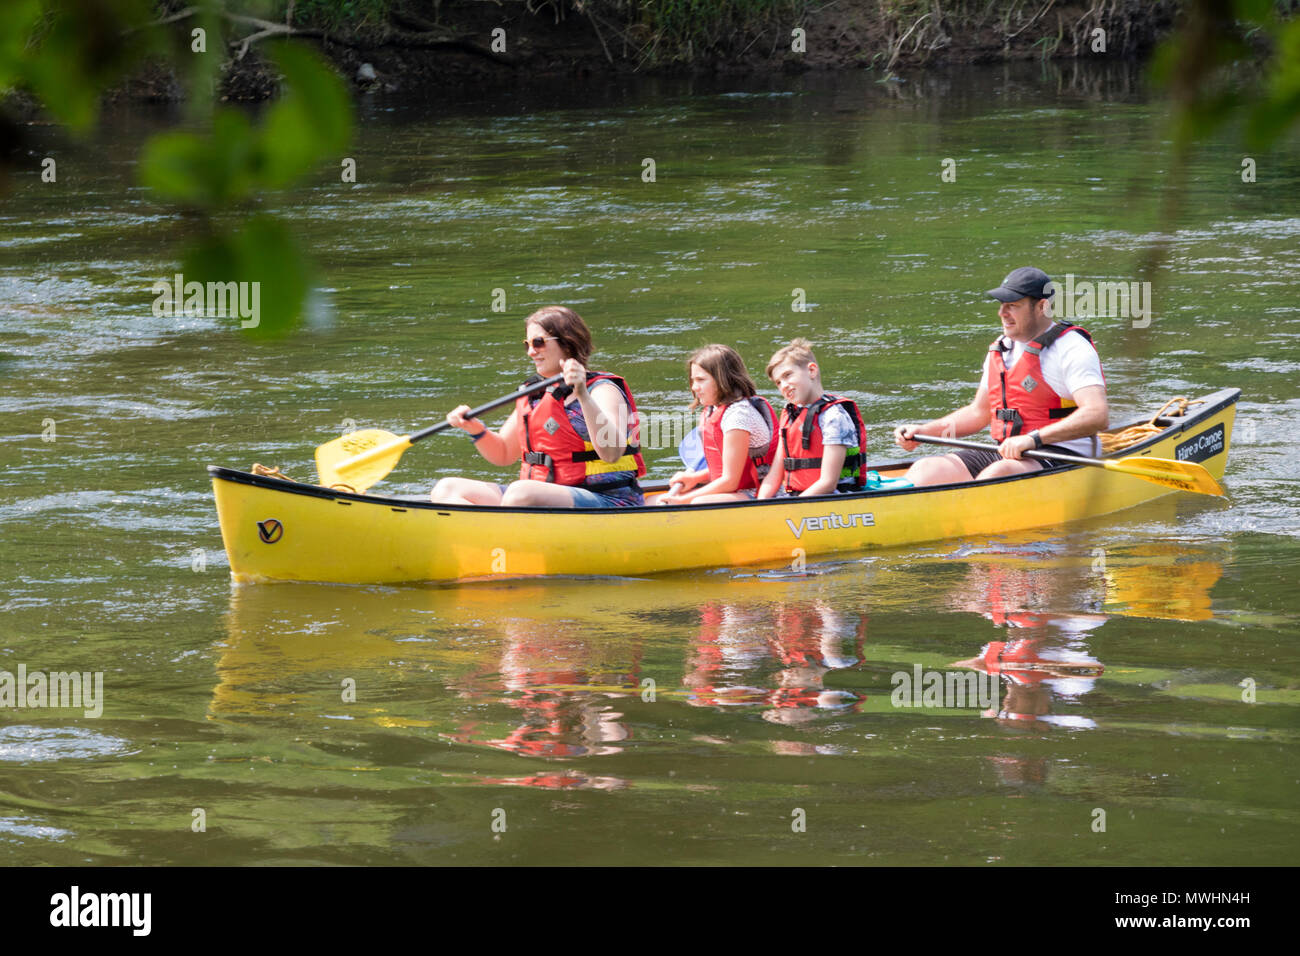 A family enjoy a day canoeing on the river, England, UK Stock Photo